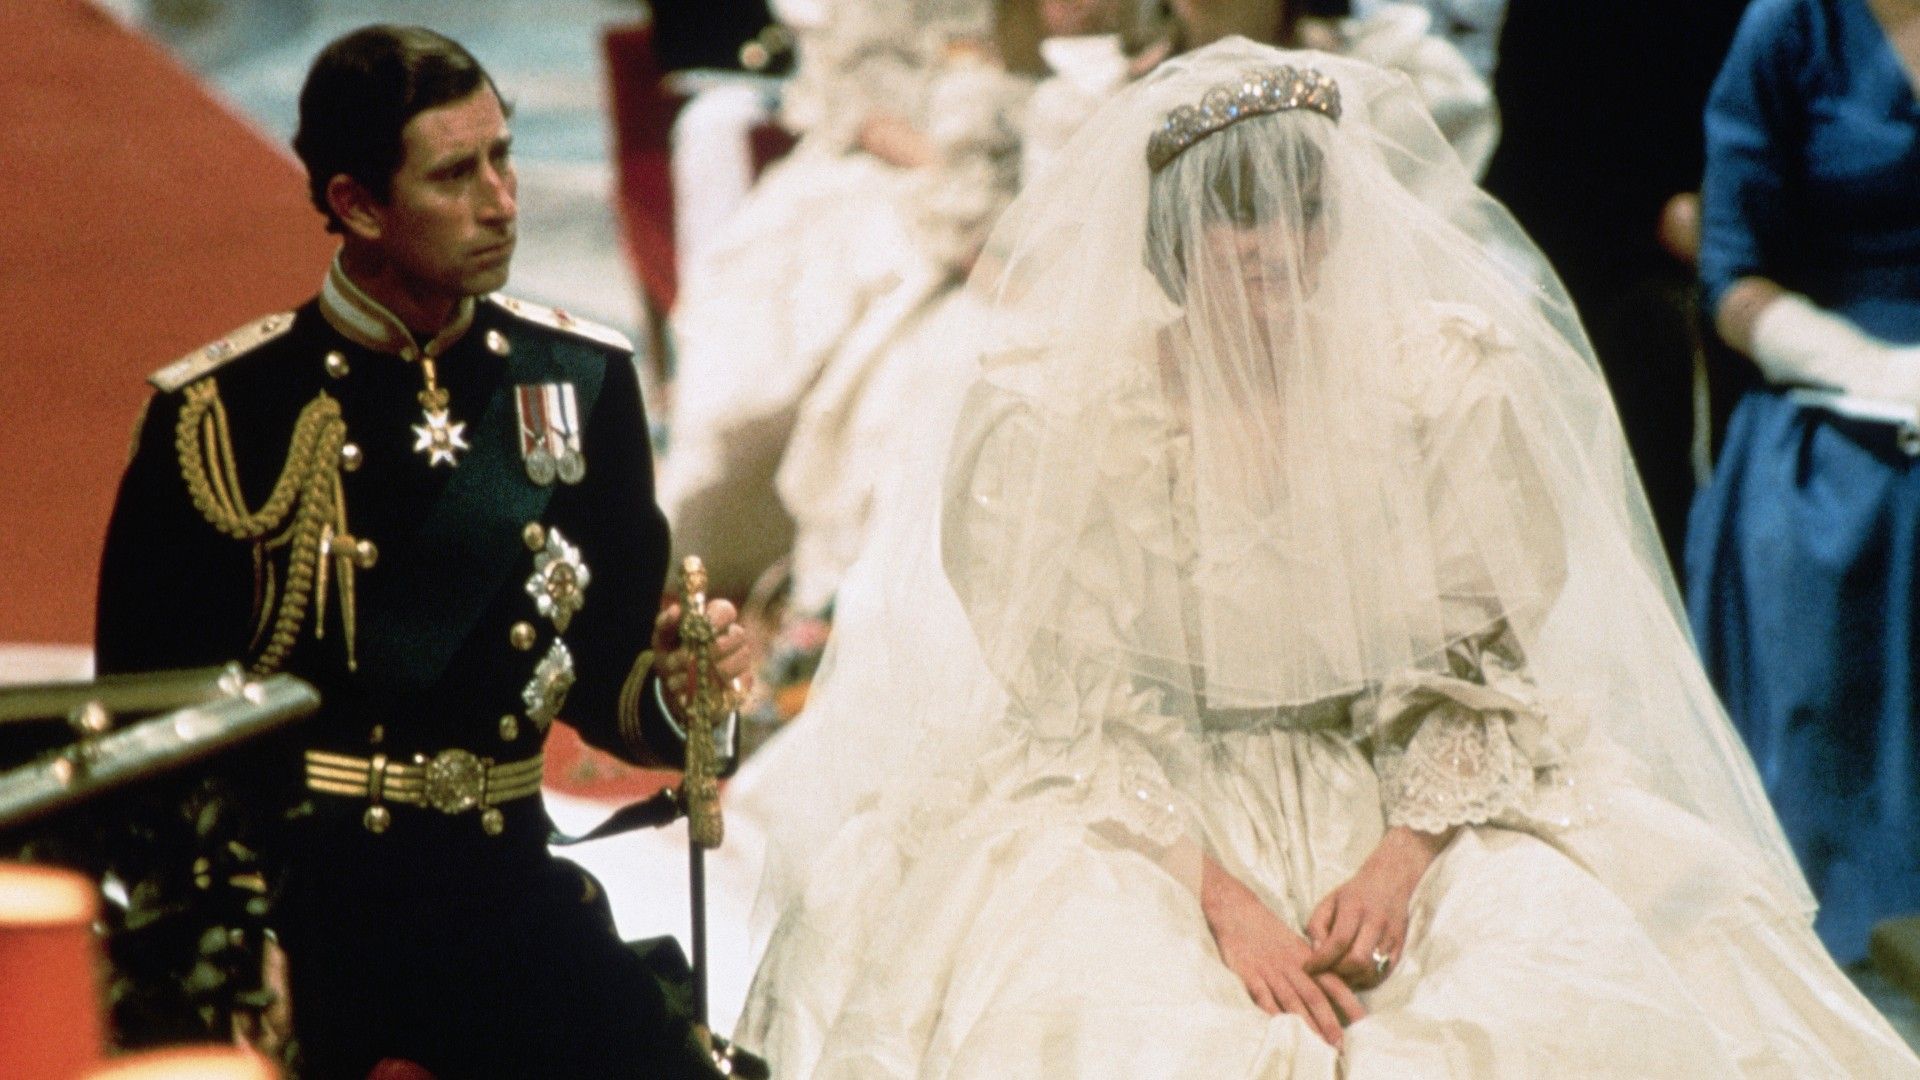 <p>                     Ever the royal rule-breaker, Princess Diana made a decidedly modern decision at her 1981 wedding, when she opted to remove the words ‘obey’ from her vows to Charles.                   </p>                                      <p>                     Tradition at the time dictated that when marrying in a church, the woman would say ‘to love, to cherish and to obey’, as part of her vows. However, Diana requested for the ‘obey’ part of the vow to be taken out, a request that was permitted. Instead, she simply promised ‘to love and to cherish’ King Charles.                   </p>                                      <p>                     Diana's daughter-in-law Catherine also left out the 'obey' section of the vows when she married Prince William.                   </p>